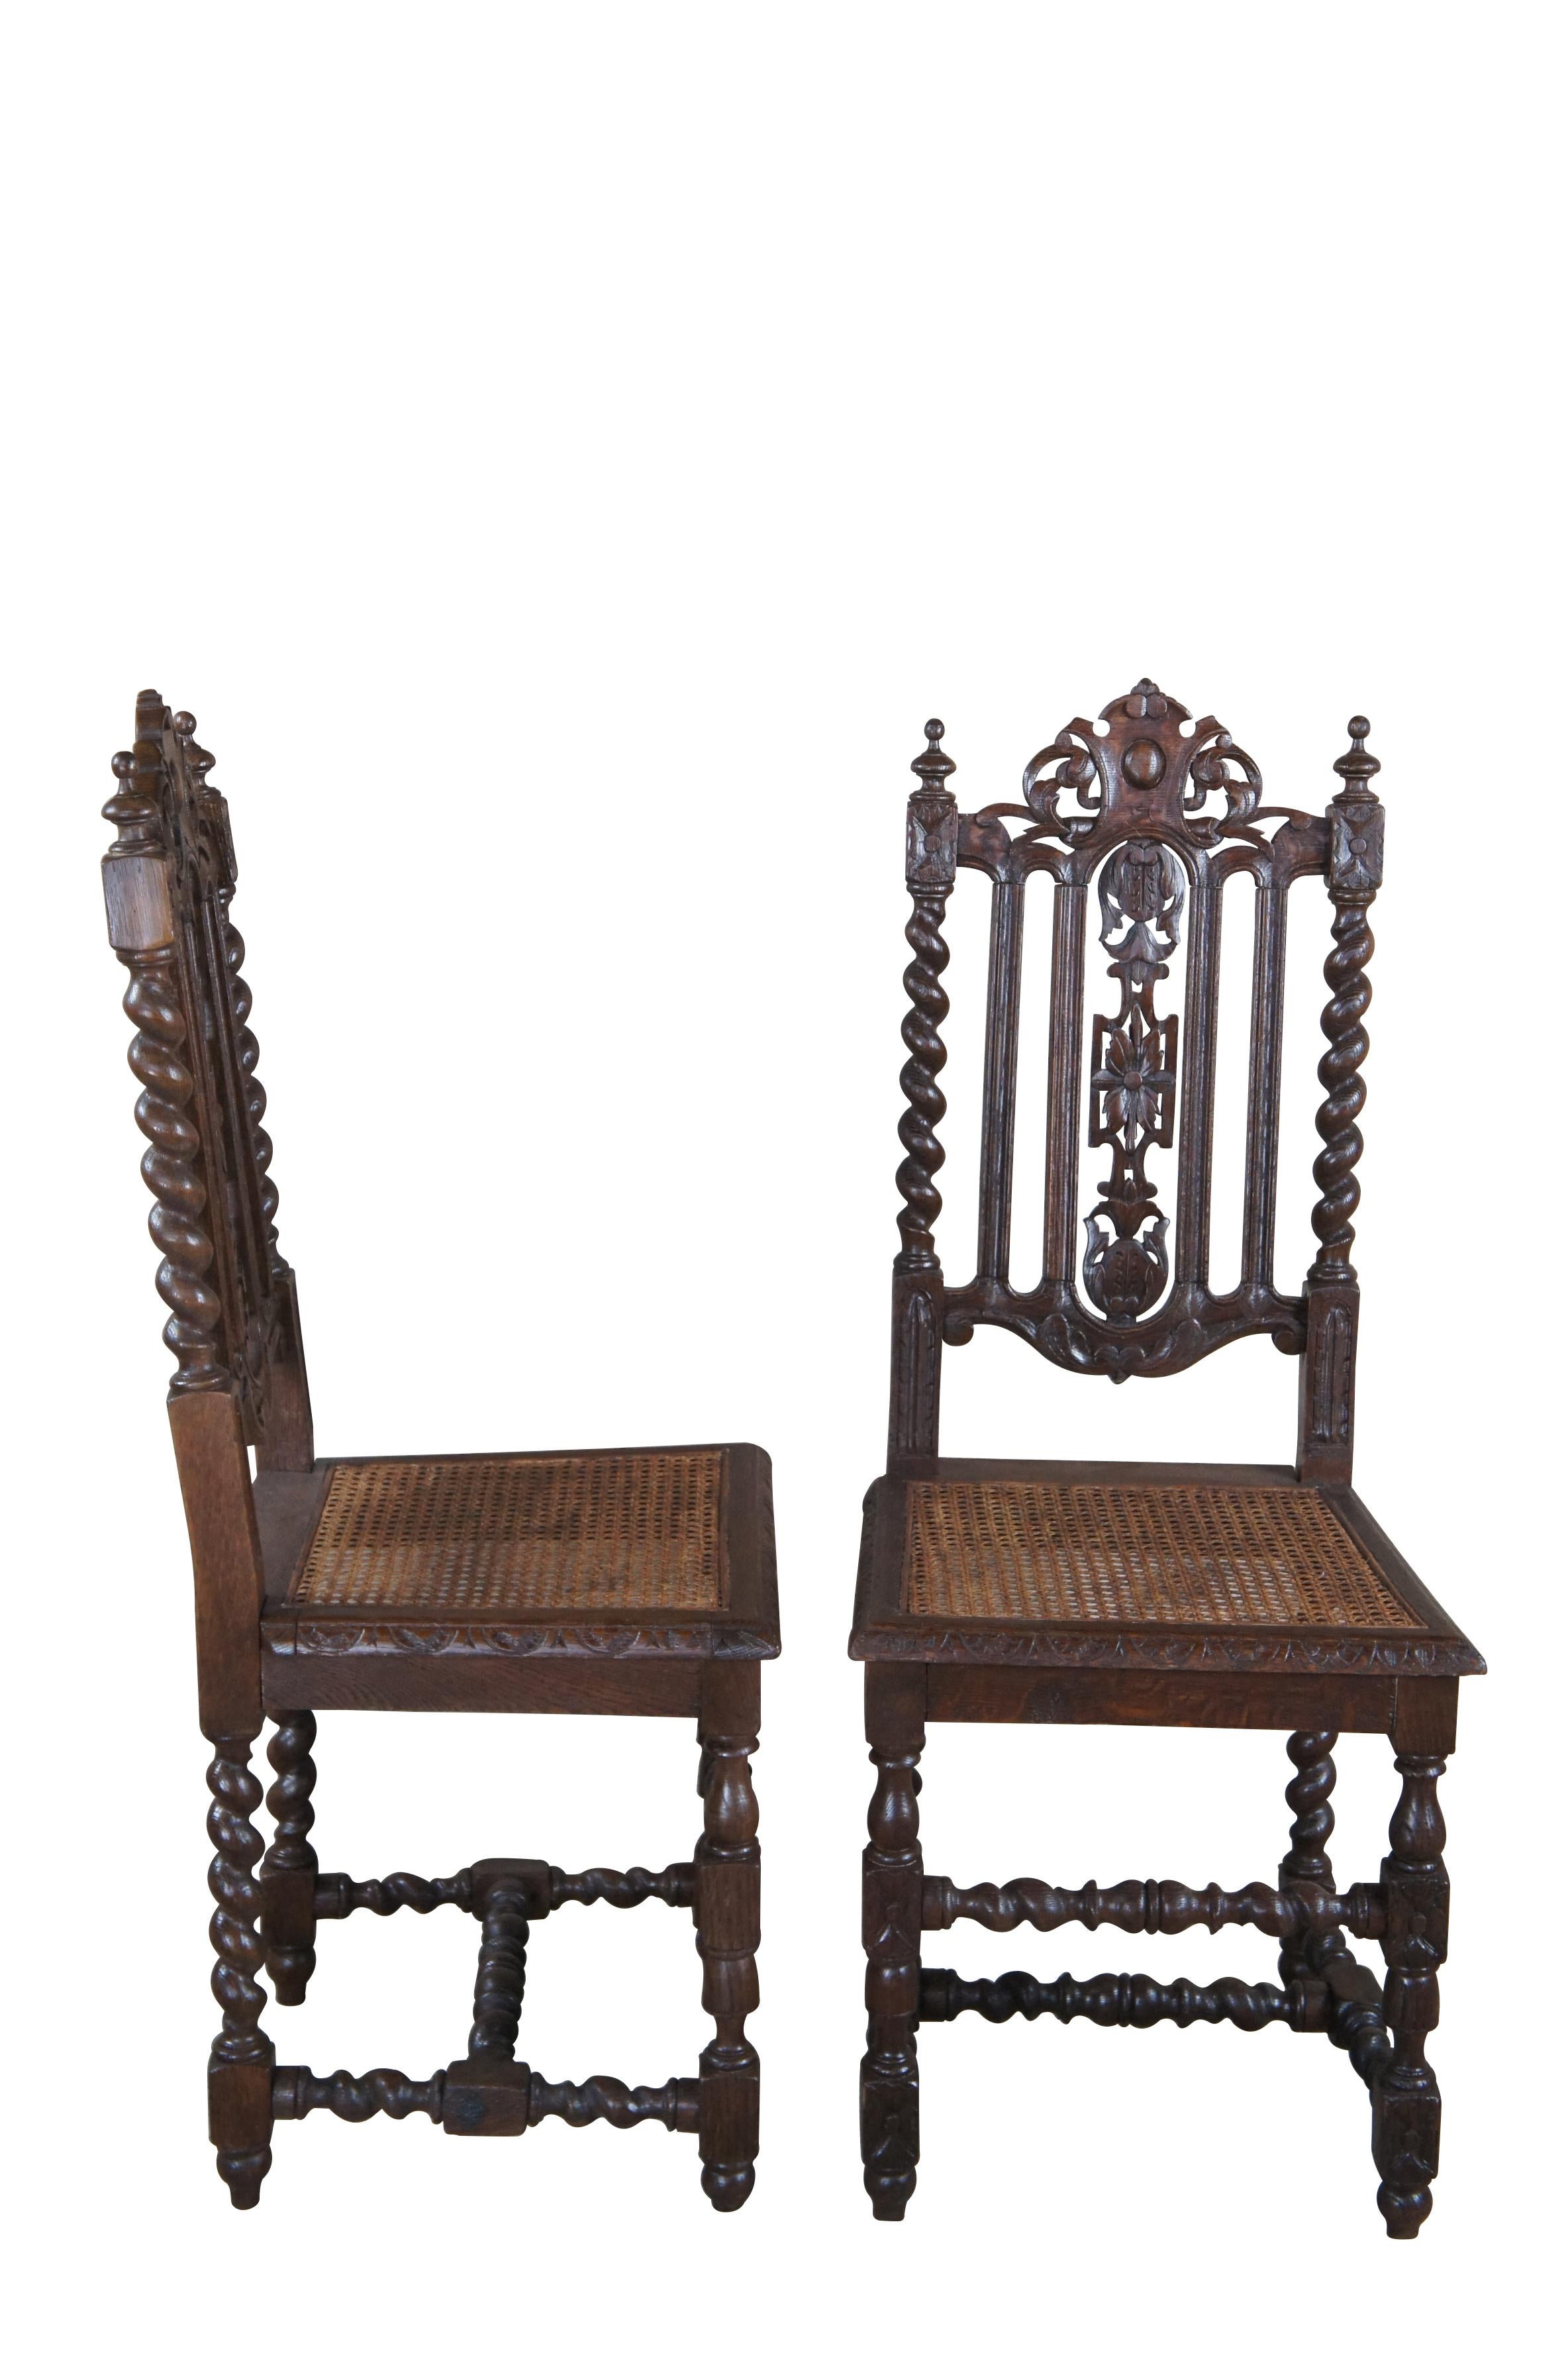 Set of 3 Antique French Renaissance dining chairs.  Beautifully crafted with oak frames carved in a Baroque manner with pierced backs and barley twist supports.  Features woven cane seats neatly framed by a beveled and carved wooden seat frame. 